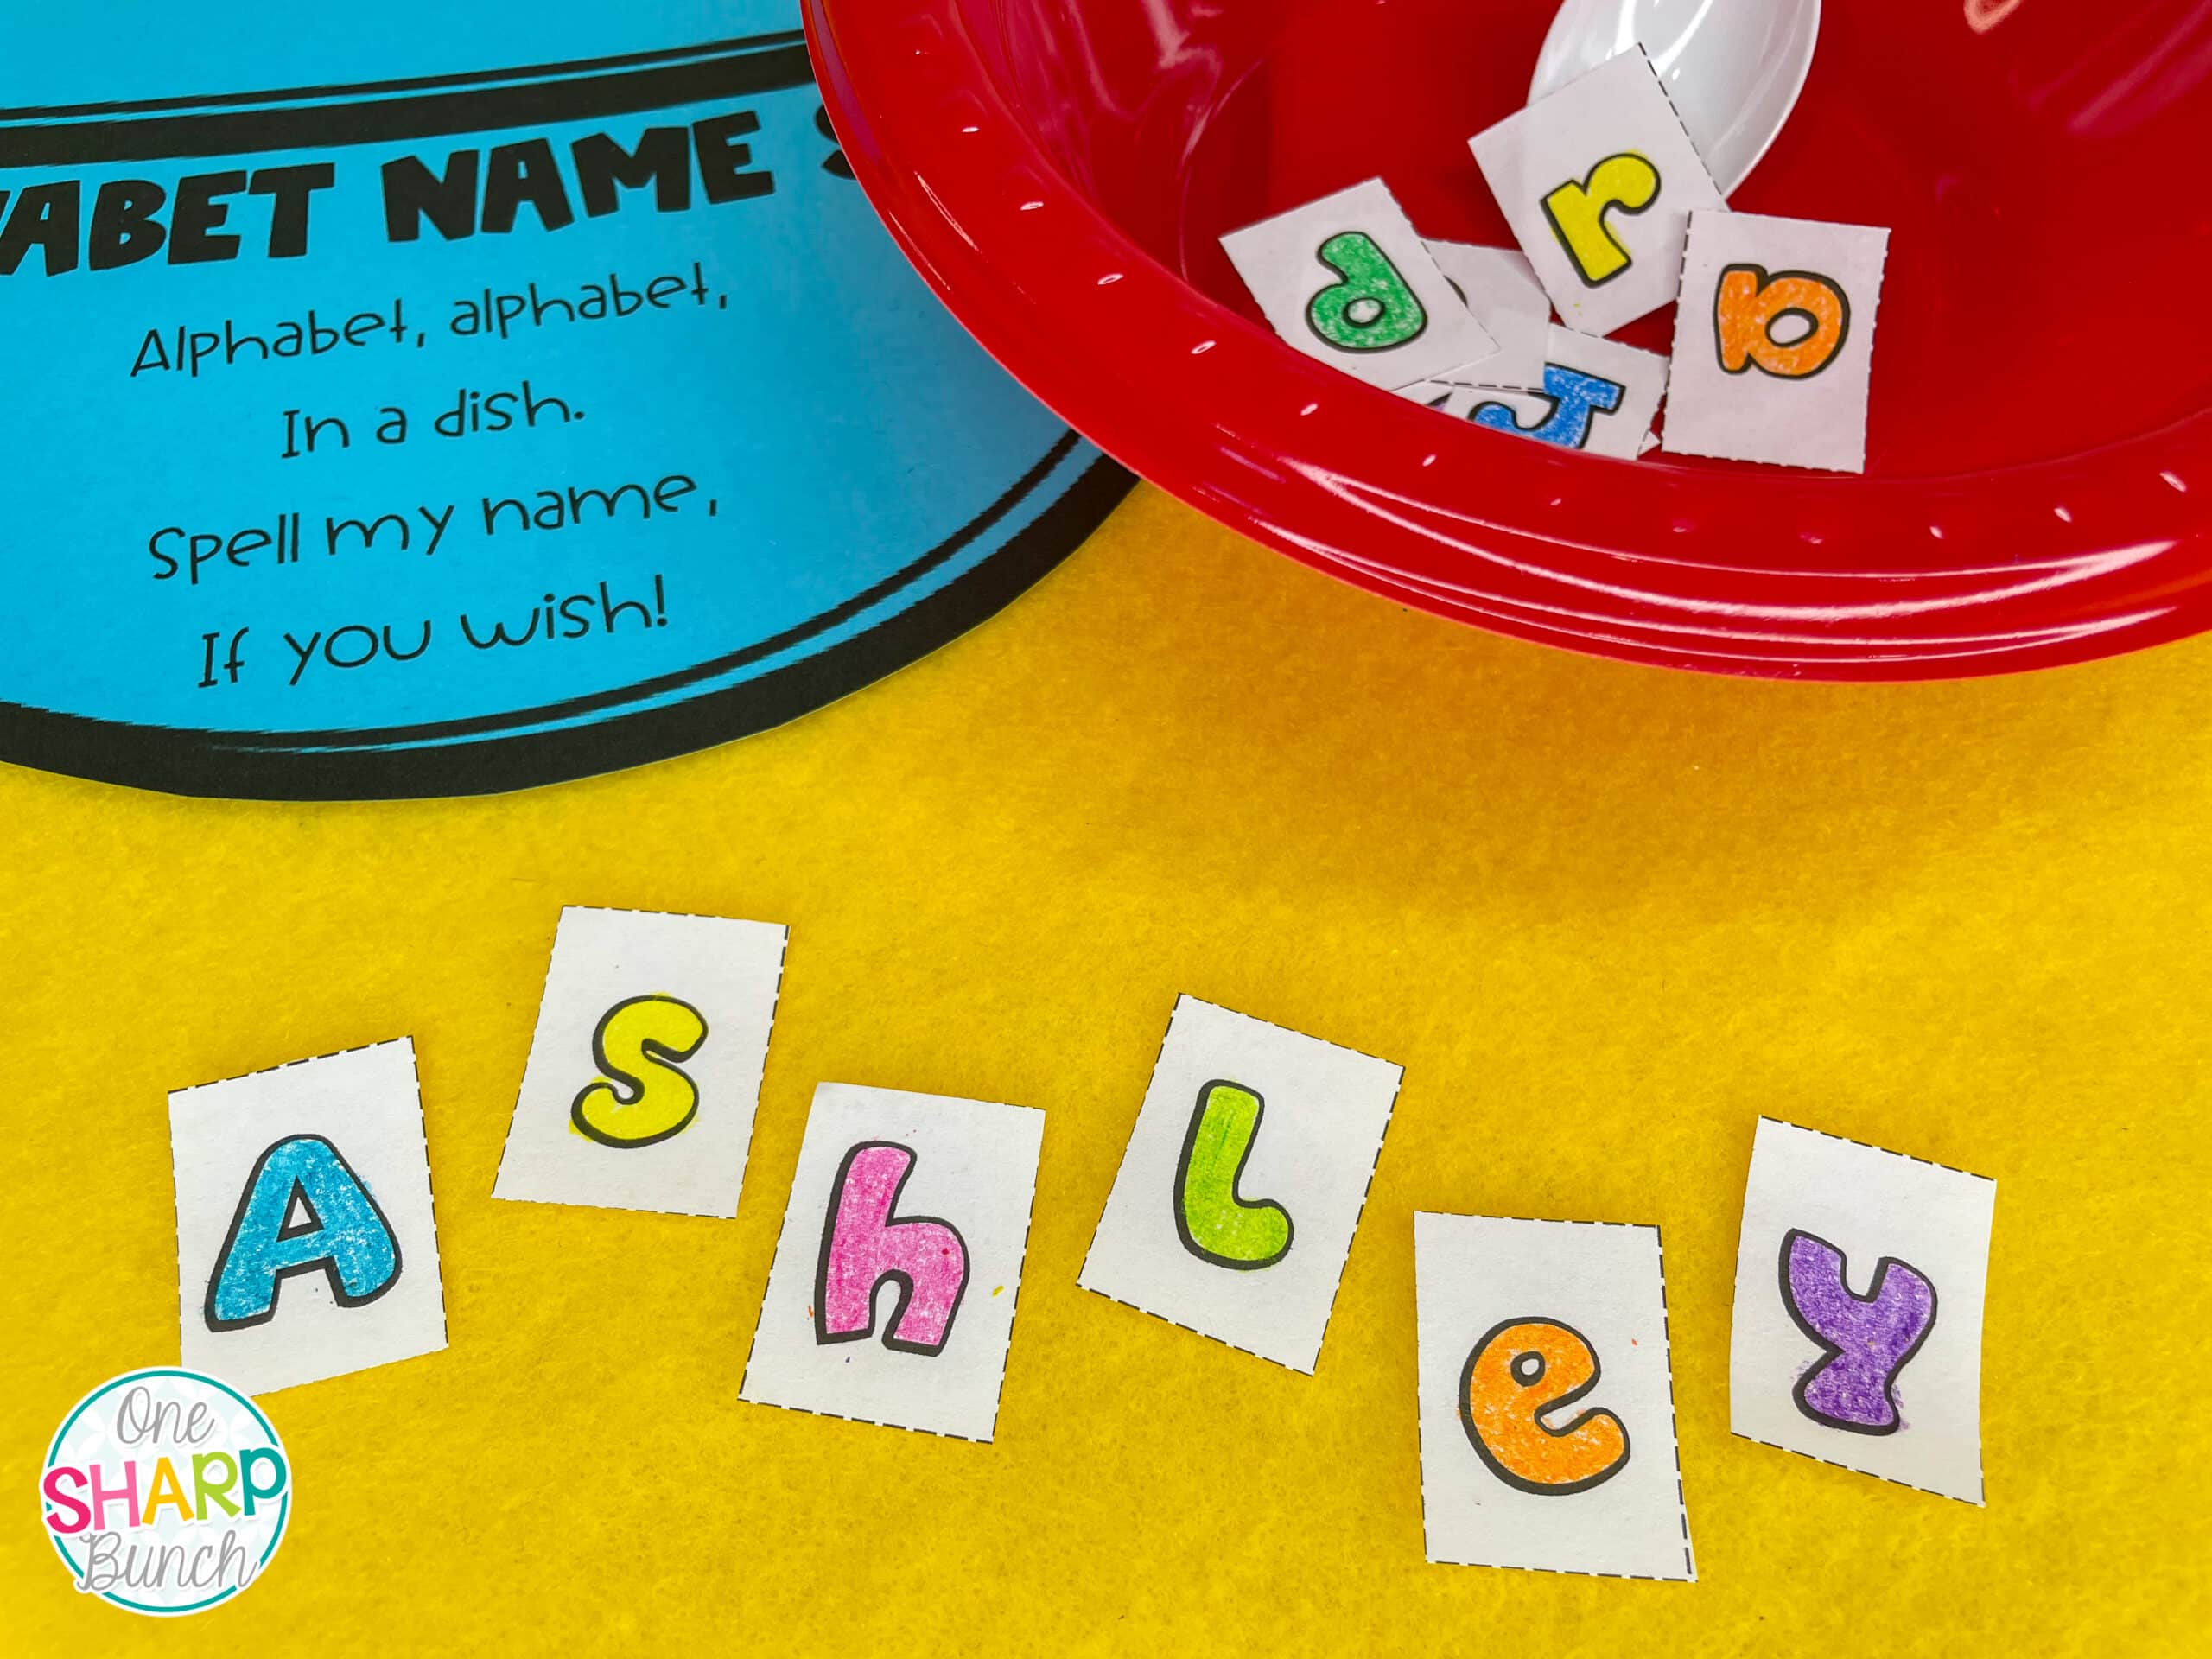 Discover a full list of name activities, including name puzzles, name crafts, name poems, name graphs and more! Students will practice fine motor skills, as well as tracing their name, with these name practice activities and name tracing mats. Plus, these name crafts make the perfect back to school bulletin boards. Students not only get to practice name writing and building their name, but they also practice math skills. Pair these name activities with any of your favorite name books for kids!